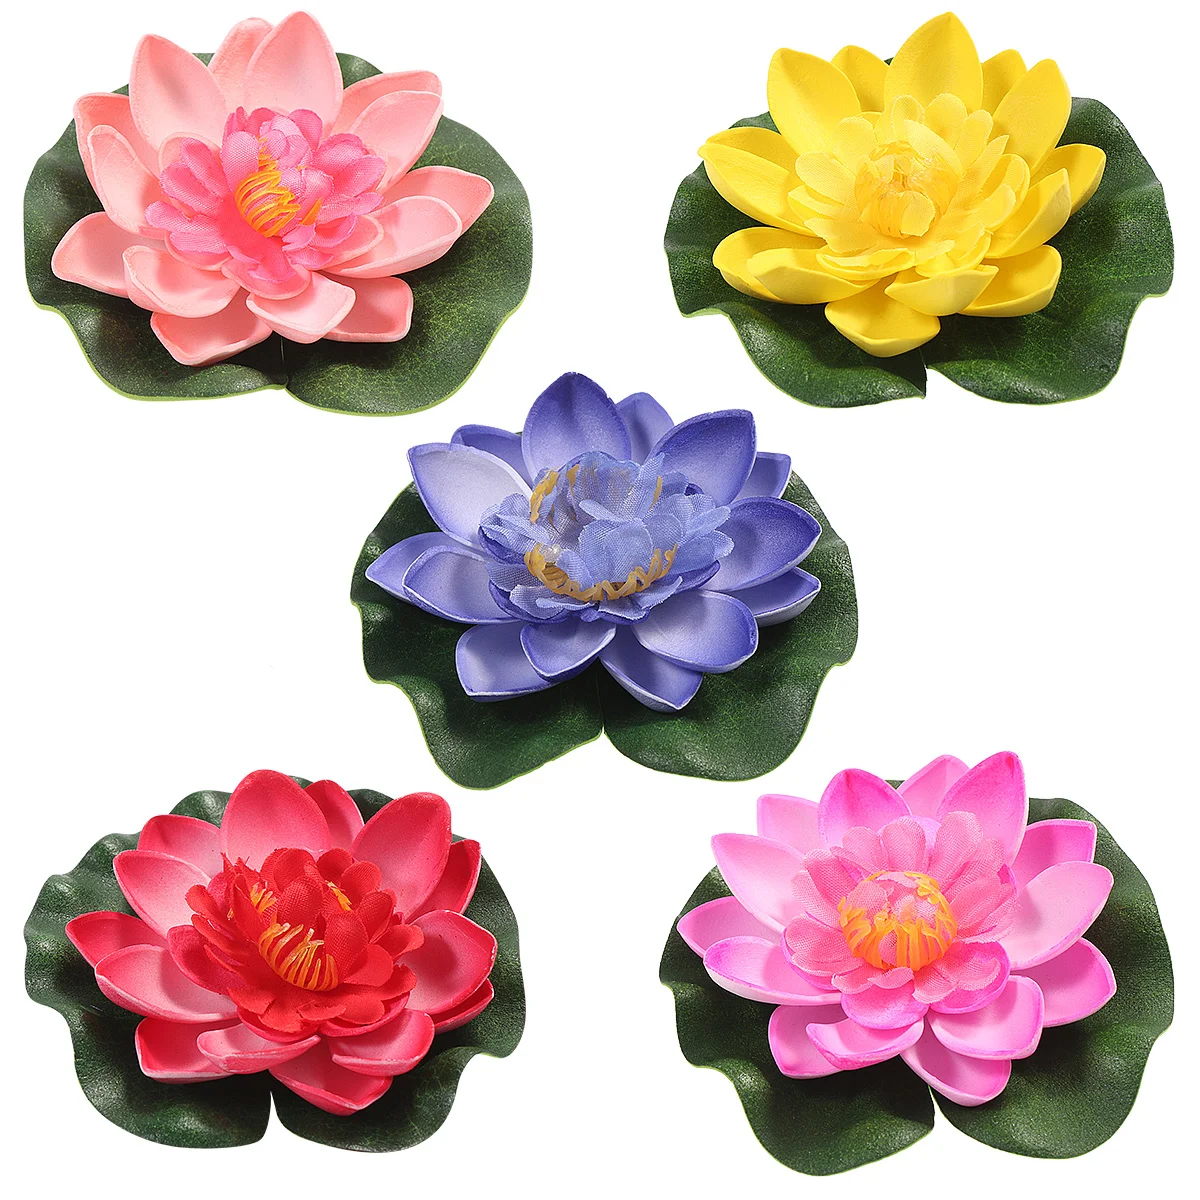 

Vorcool 5Pcs Artificial Floating Water Lily EVA Lotus Flower Pond Decor 10cm Red Yellow Blue Pink Light Pink